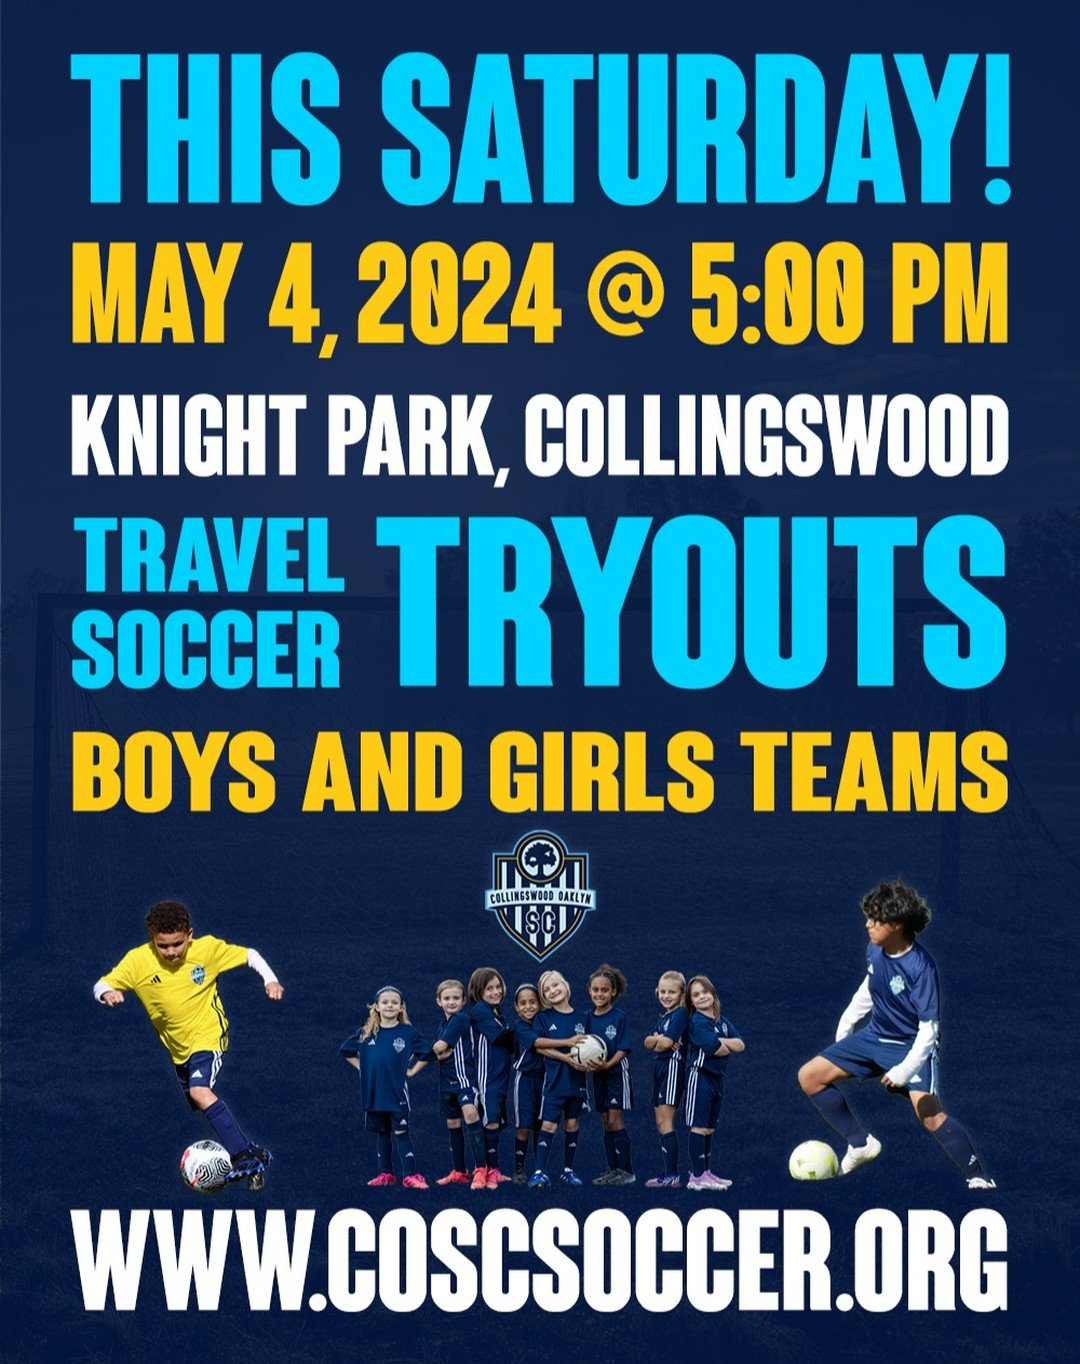 COSC travel soccer tryouts will be held this Saturday, May 4, 2024 at 5:00 PM at Knight Park in Collingswood, NJ. Boys and girls players with 2015, 2016, and 2017 birth years should register and attend tryouts! Players with 2014 and older birth years